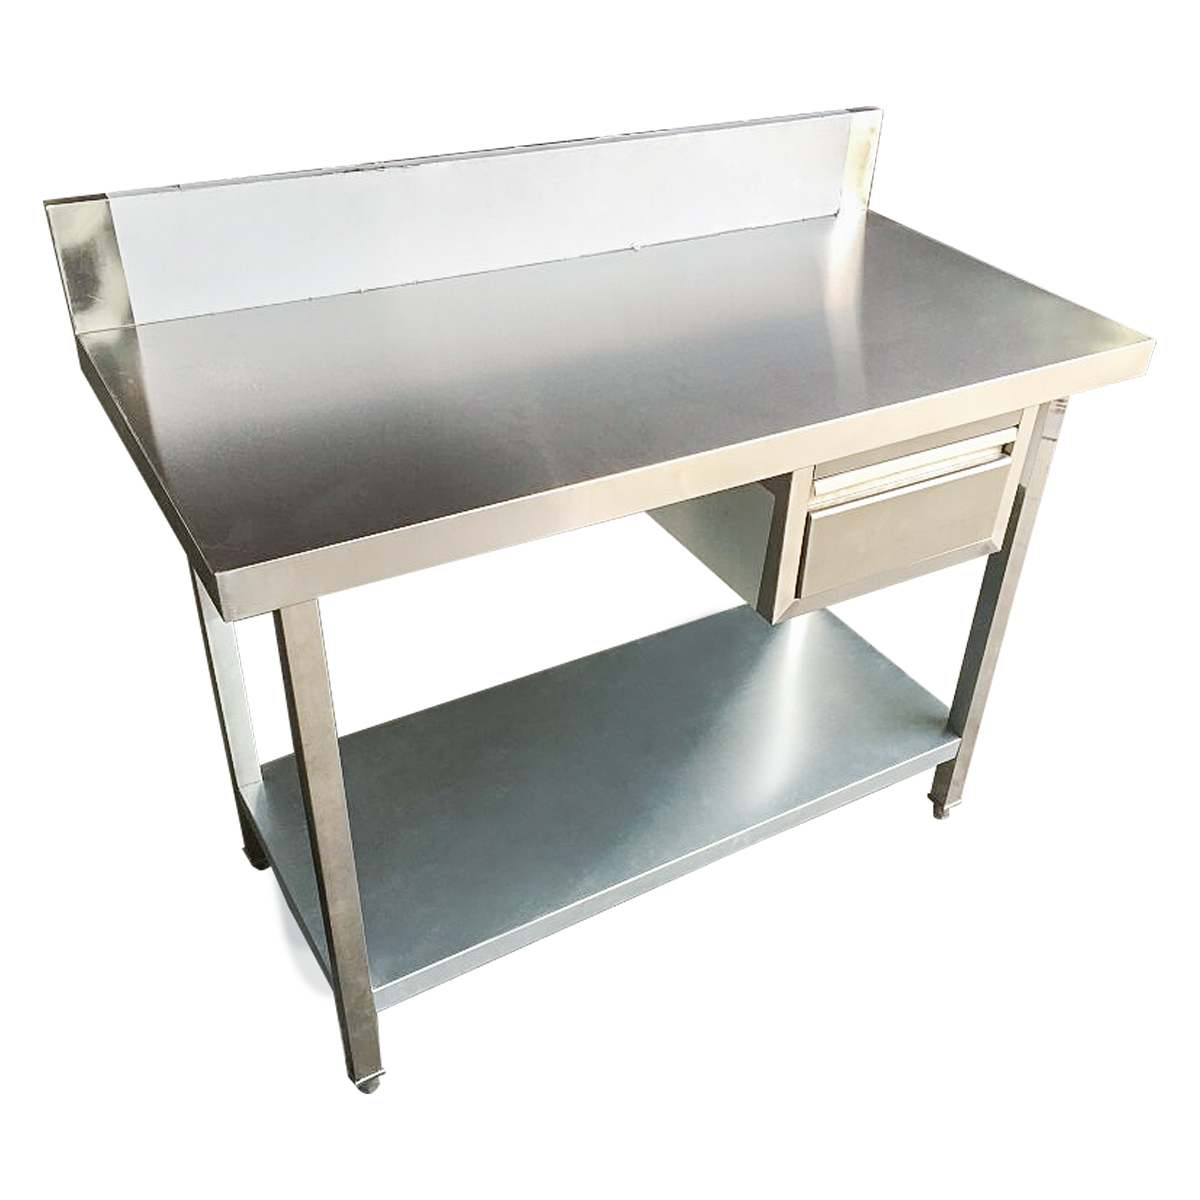 Stainless Steel Work Table With Drawer, Stainless Steel Work Table With Shelves And Drawers